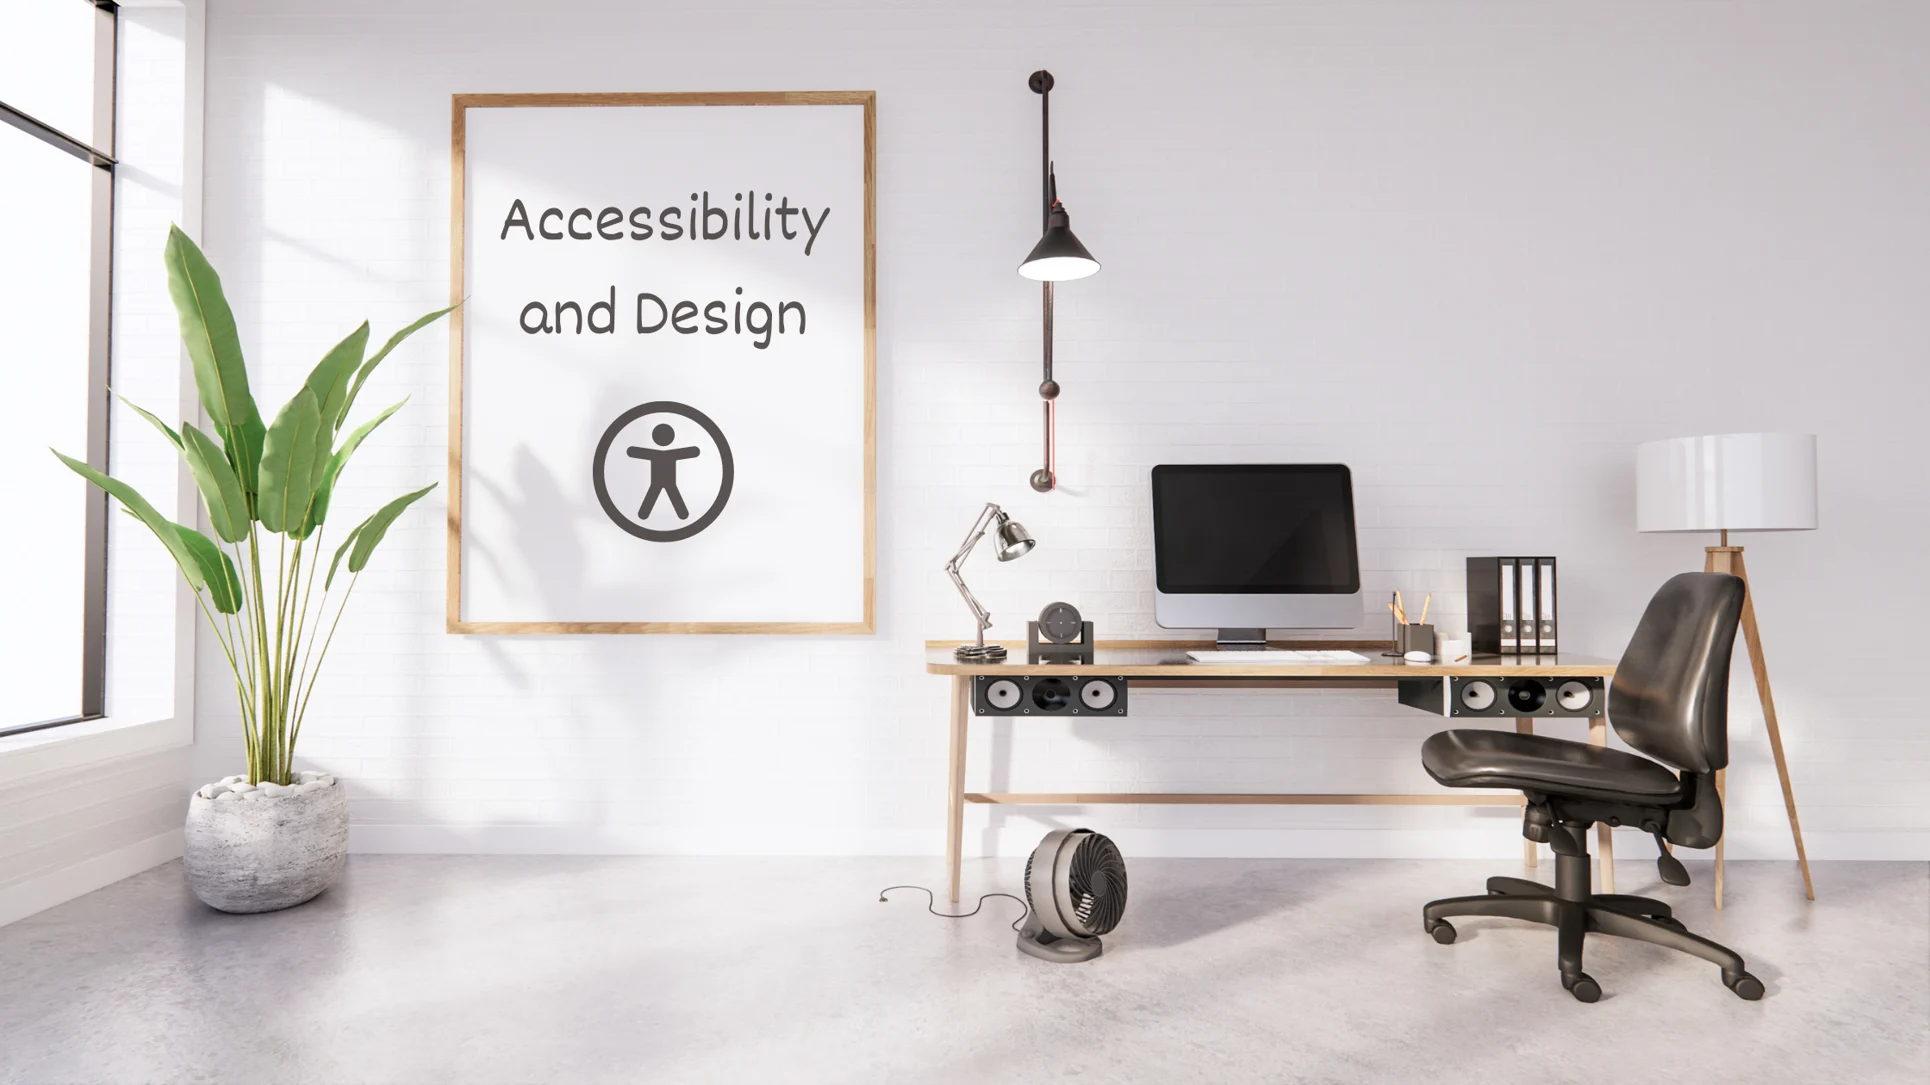 a modern minimal office with whiteboard which has "accessibility and design" written on it